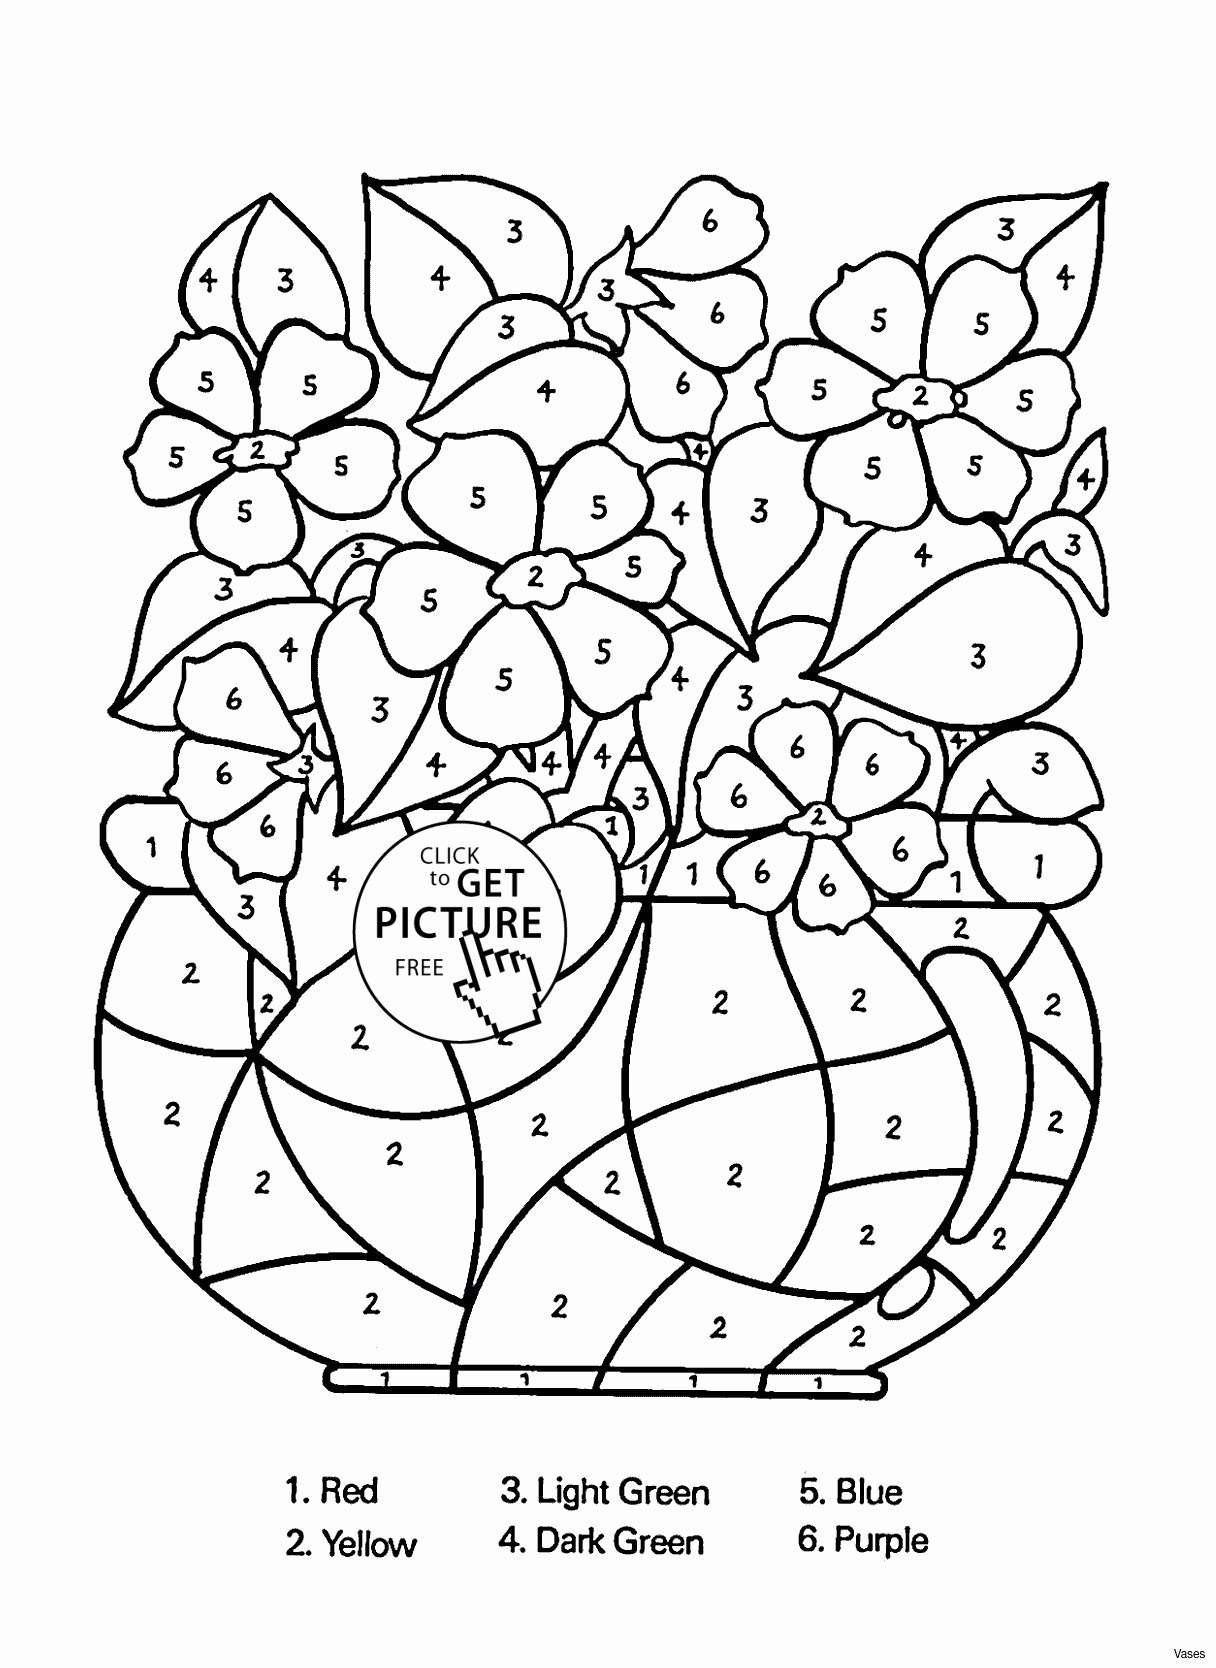 10 Amazing 8 Inch Cylinder Vase 2024 free download 8 inch cylinder vase of 5 cylinder vase photograph vases flower vase coloring page pages inside 5 cylinder vase photograph vases flower vase coloring page pages flowers in a top i 0d and